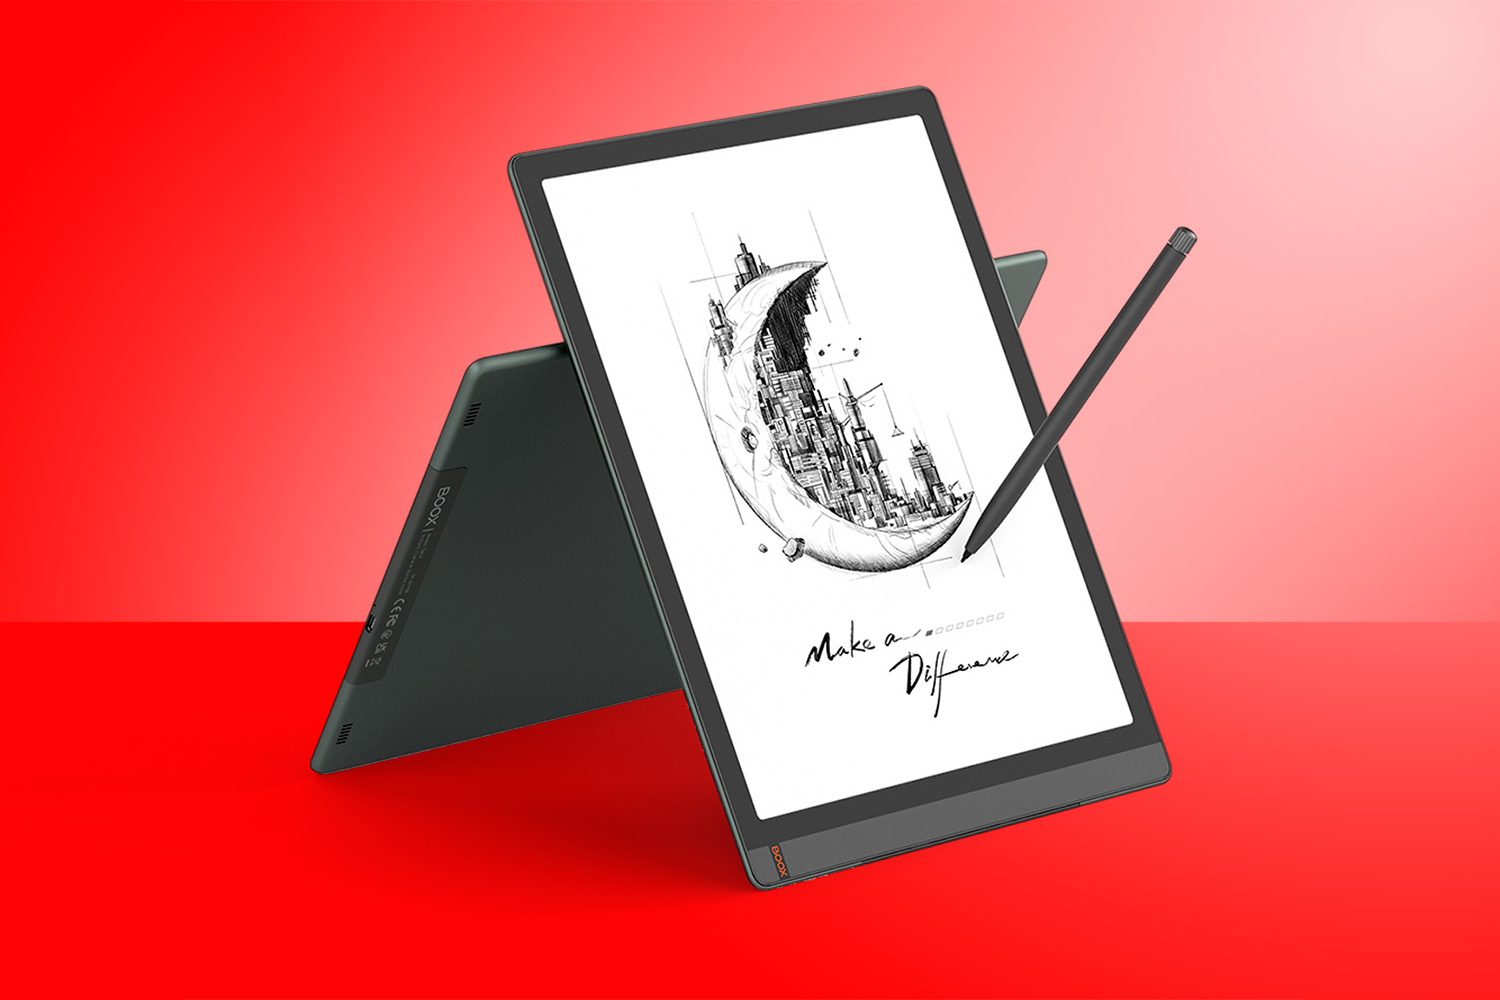 Onyx Boox Tab X is an A4-sized ePaper tablet with muscle | Stuff